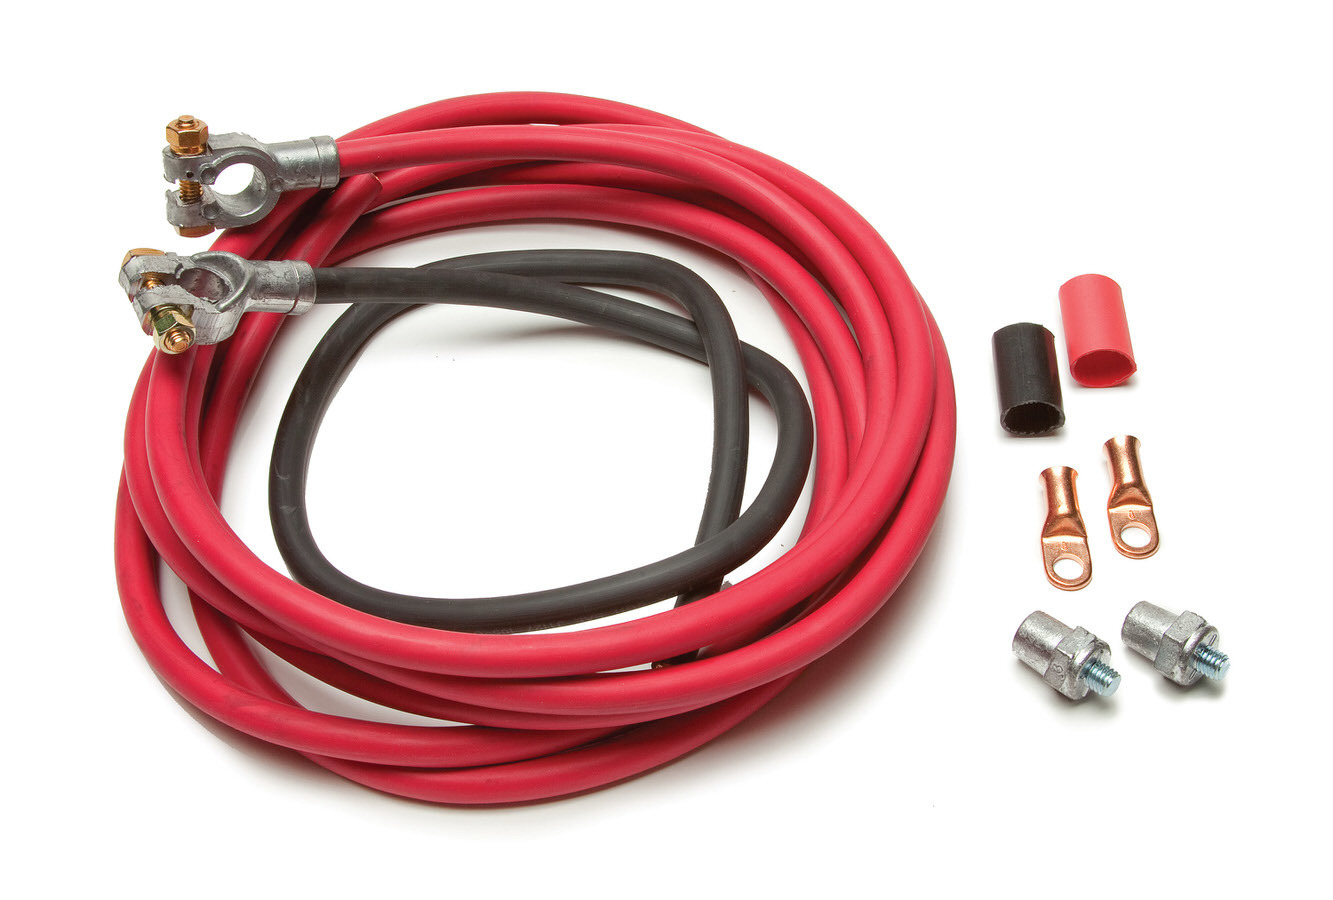 Painless Wiring 40100 Battery Cable Kit, 1 Gauge, Top Mount Battery Terminals, Side Post Adapters / Terminals / Heat Shrink Included, Copper, 16 ft Red / 3 ft Black, Kit